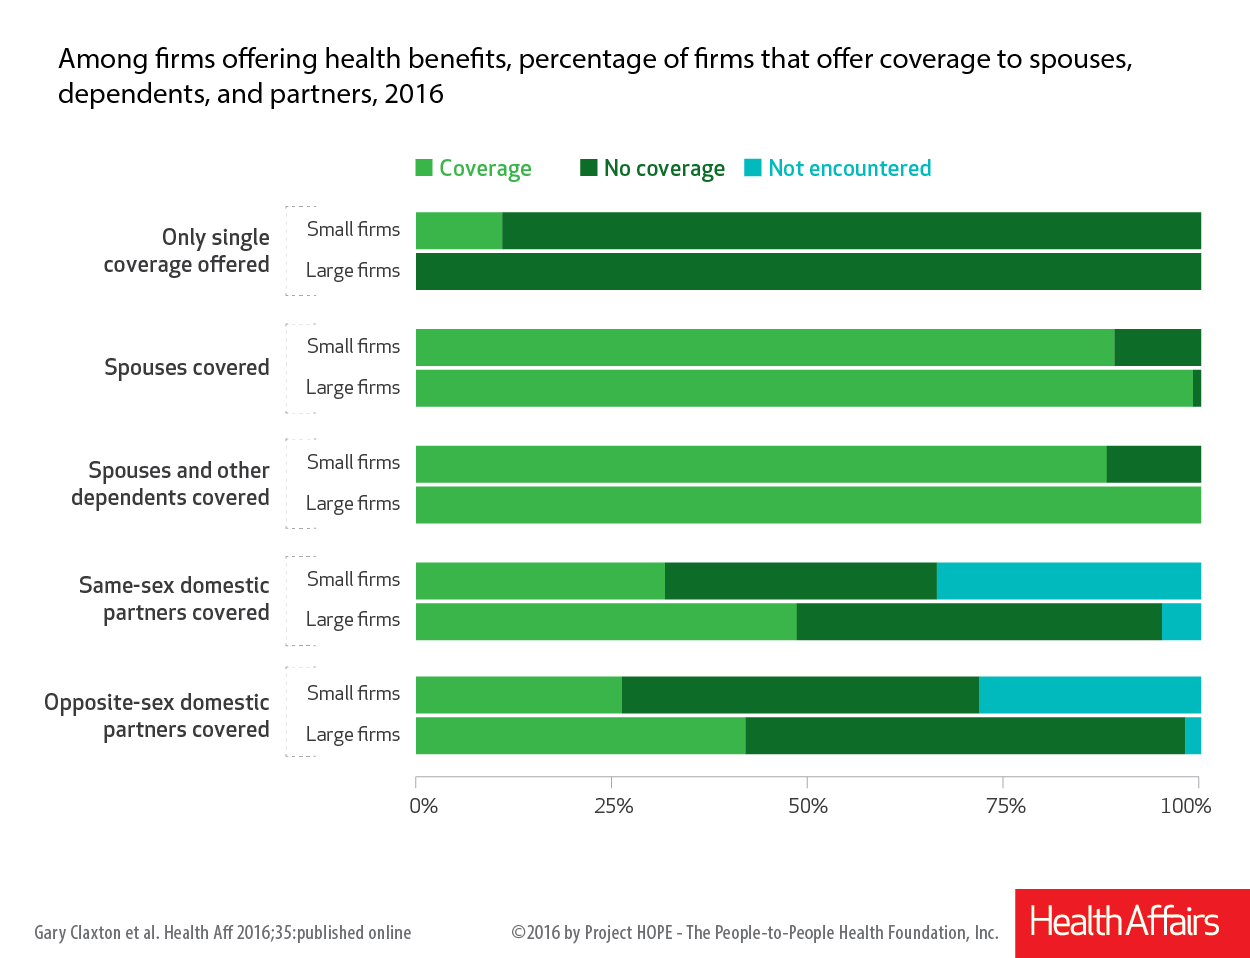 Among firms offering health benefits, percentage of firms that offer coverage to spouses, dependents, and partners, 2016.